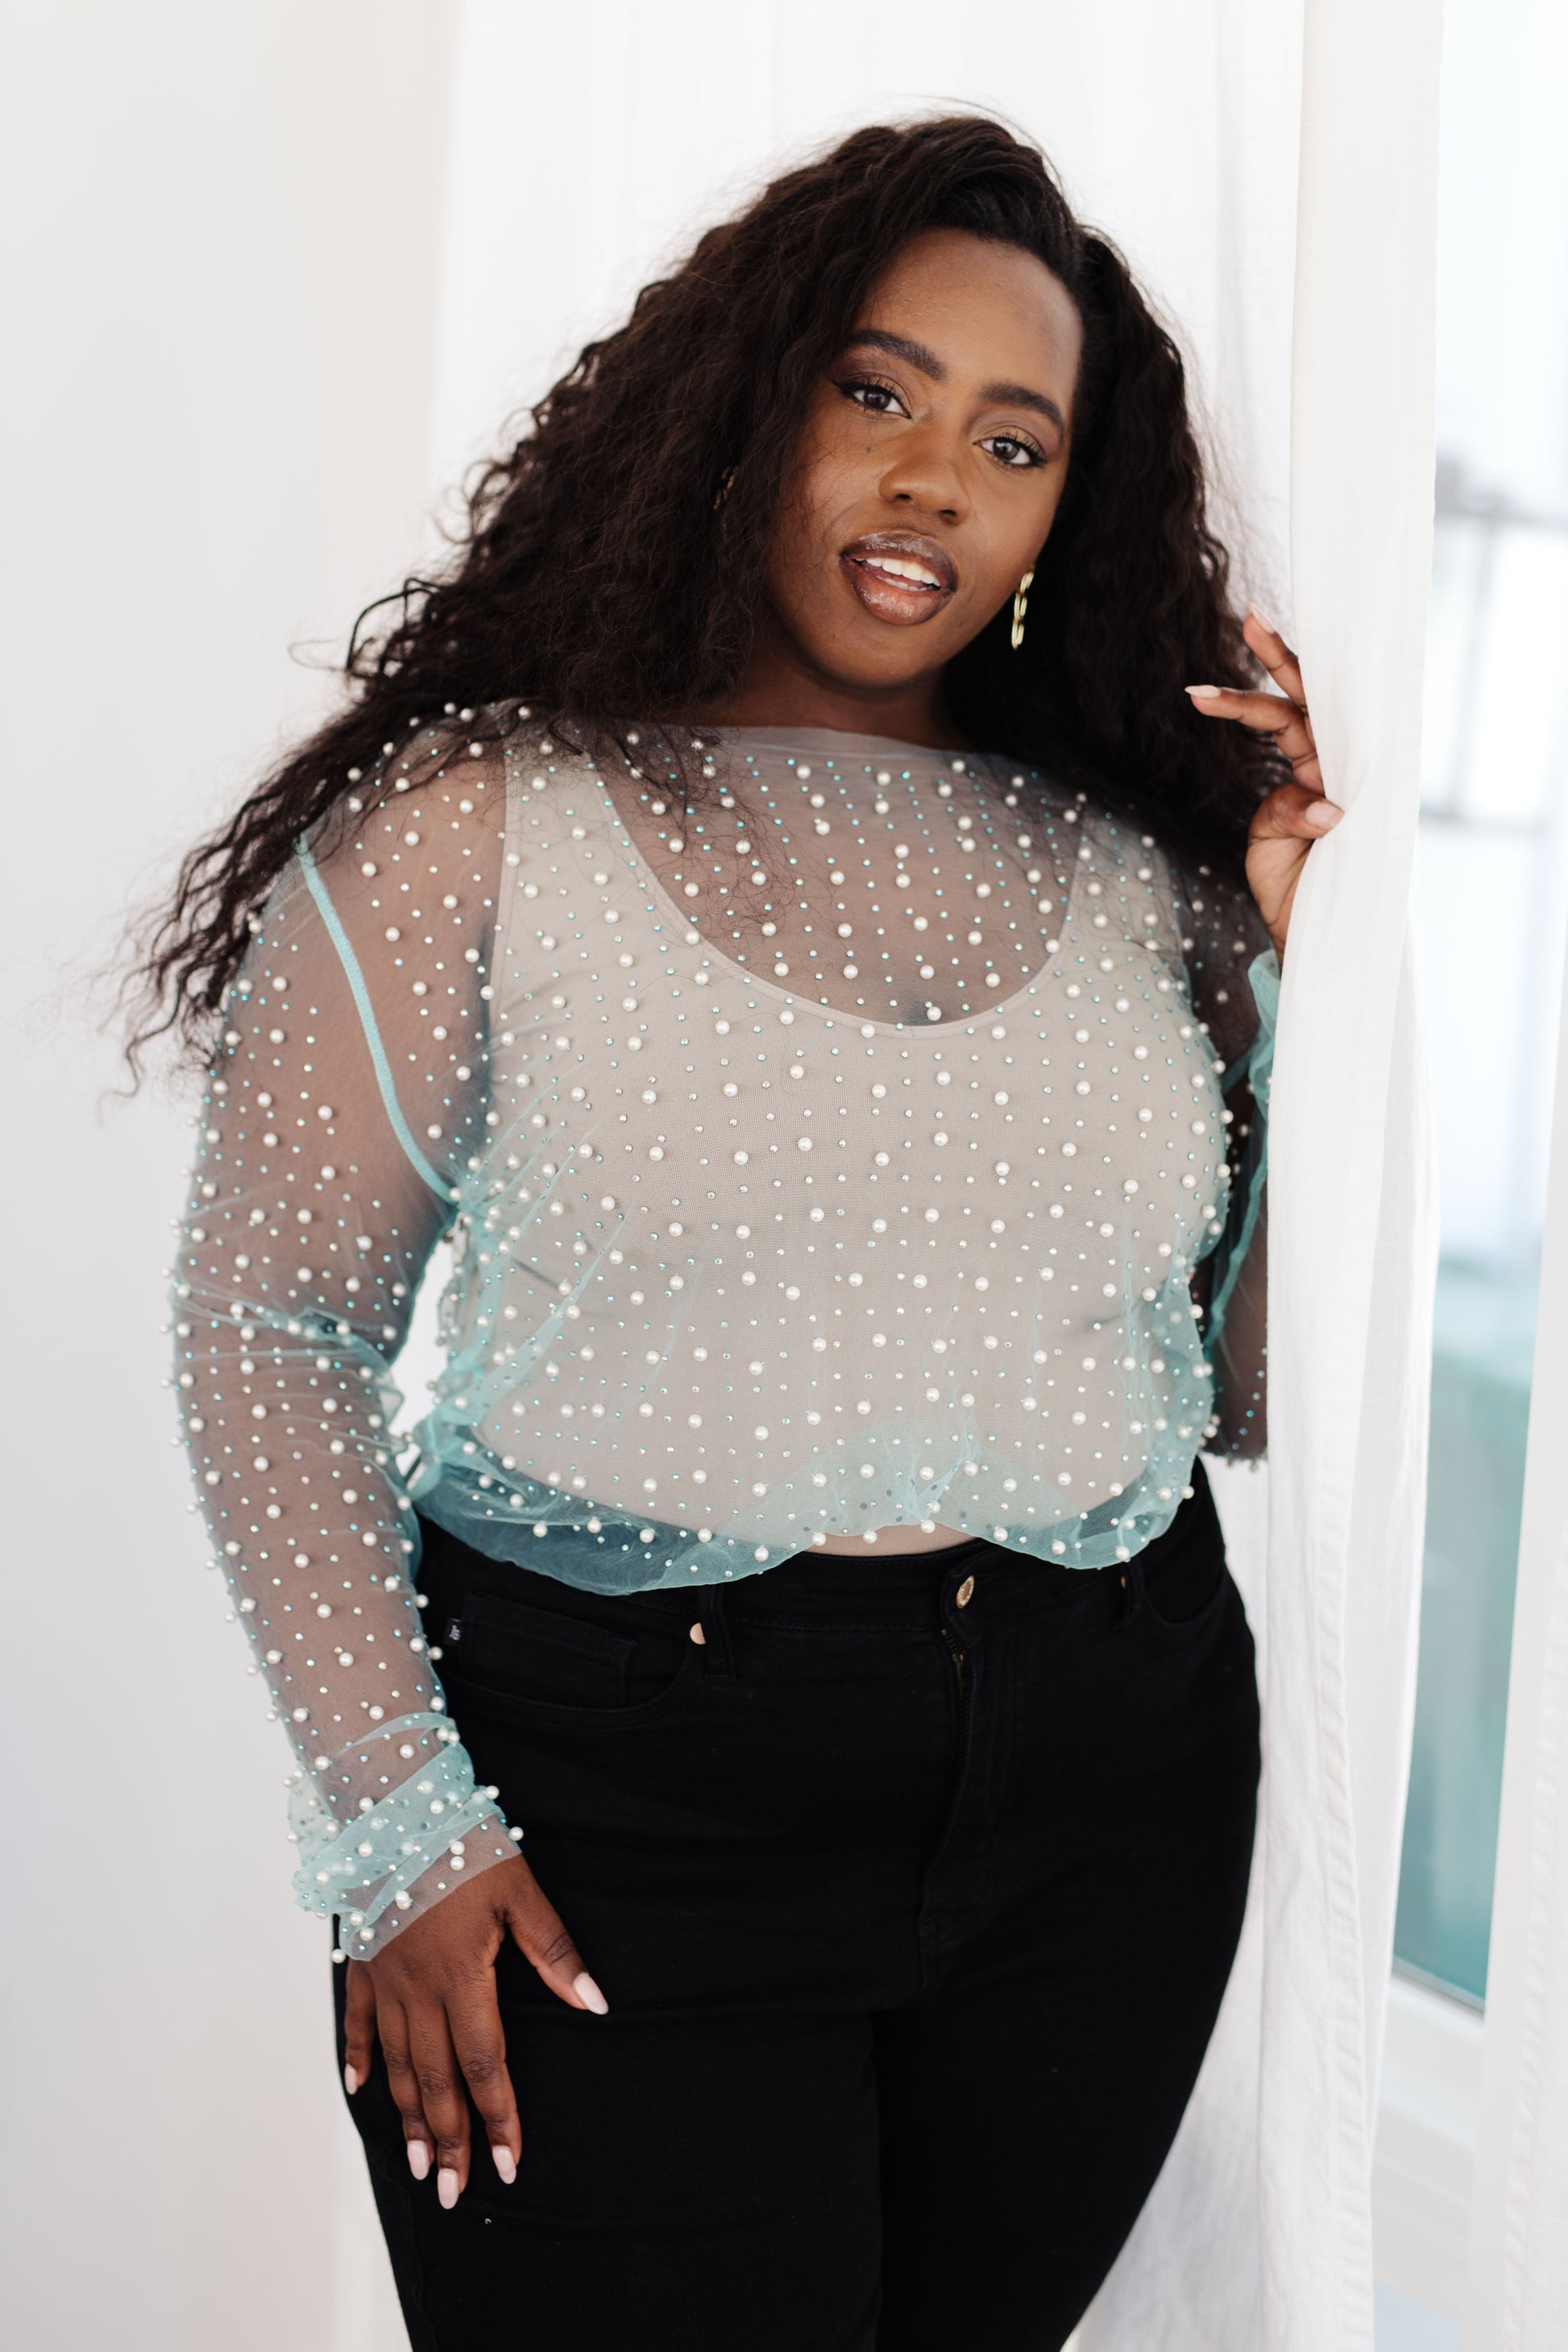 Make waves in the Pearl Diver Layering Top! This mesh long sleeve top is embellished with faux pearls and rhinestones, creating a unique and eye-catching look. Perfect for layering, this on-trend piece will add just the right amount of sparkle and texture to any outfit. Dive deep and stand out! S - 3X